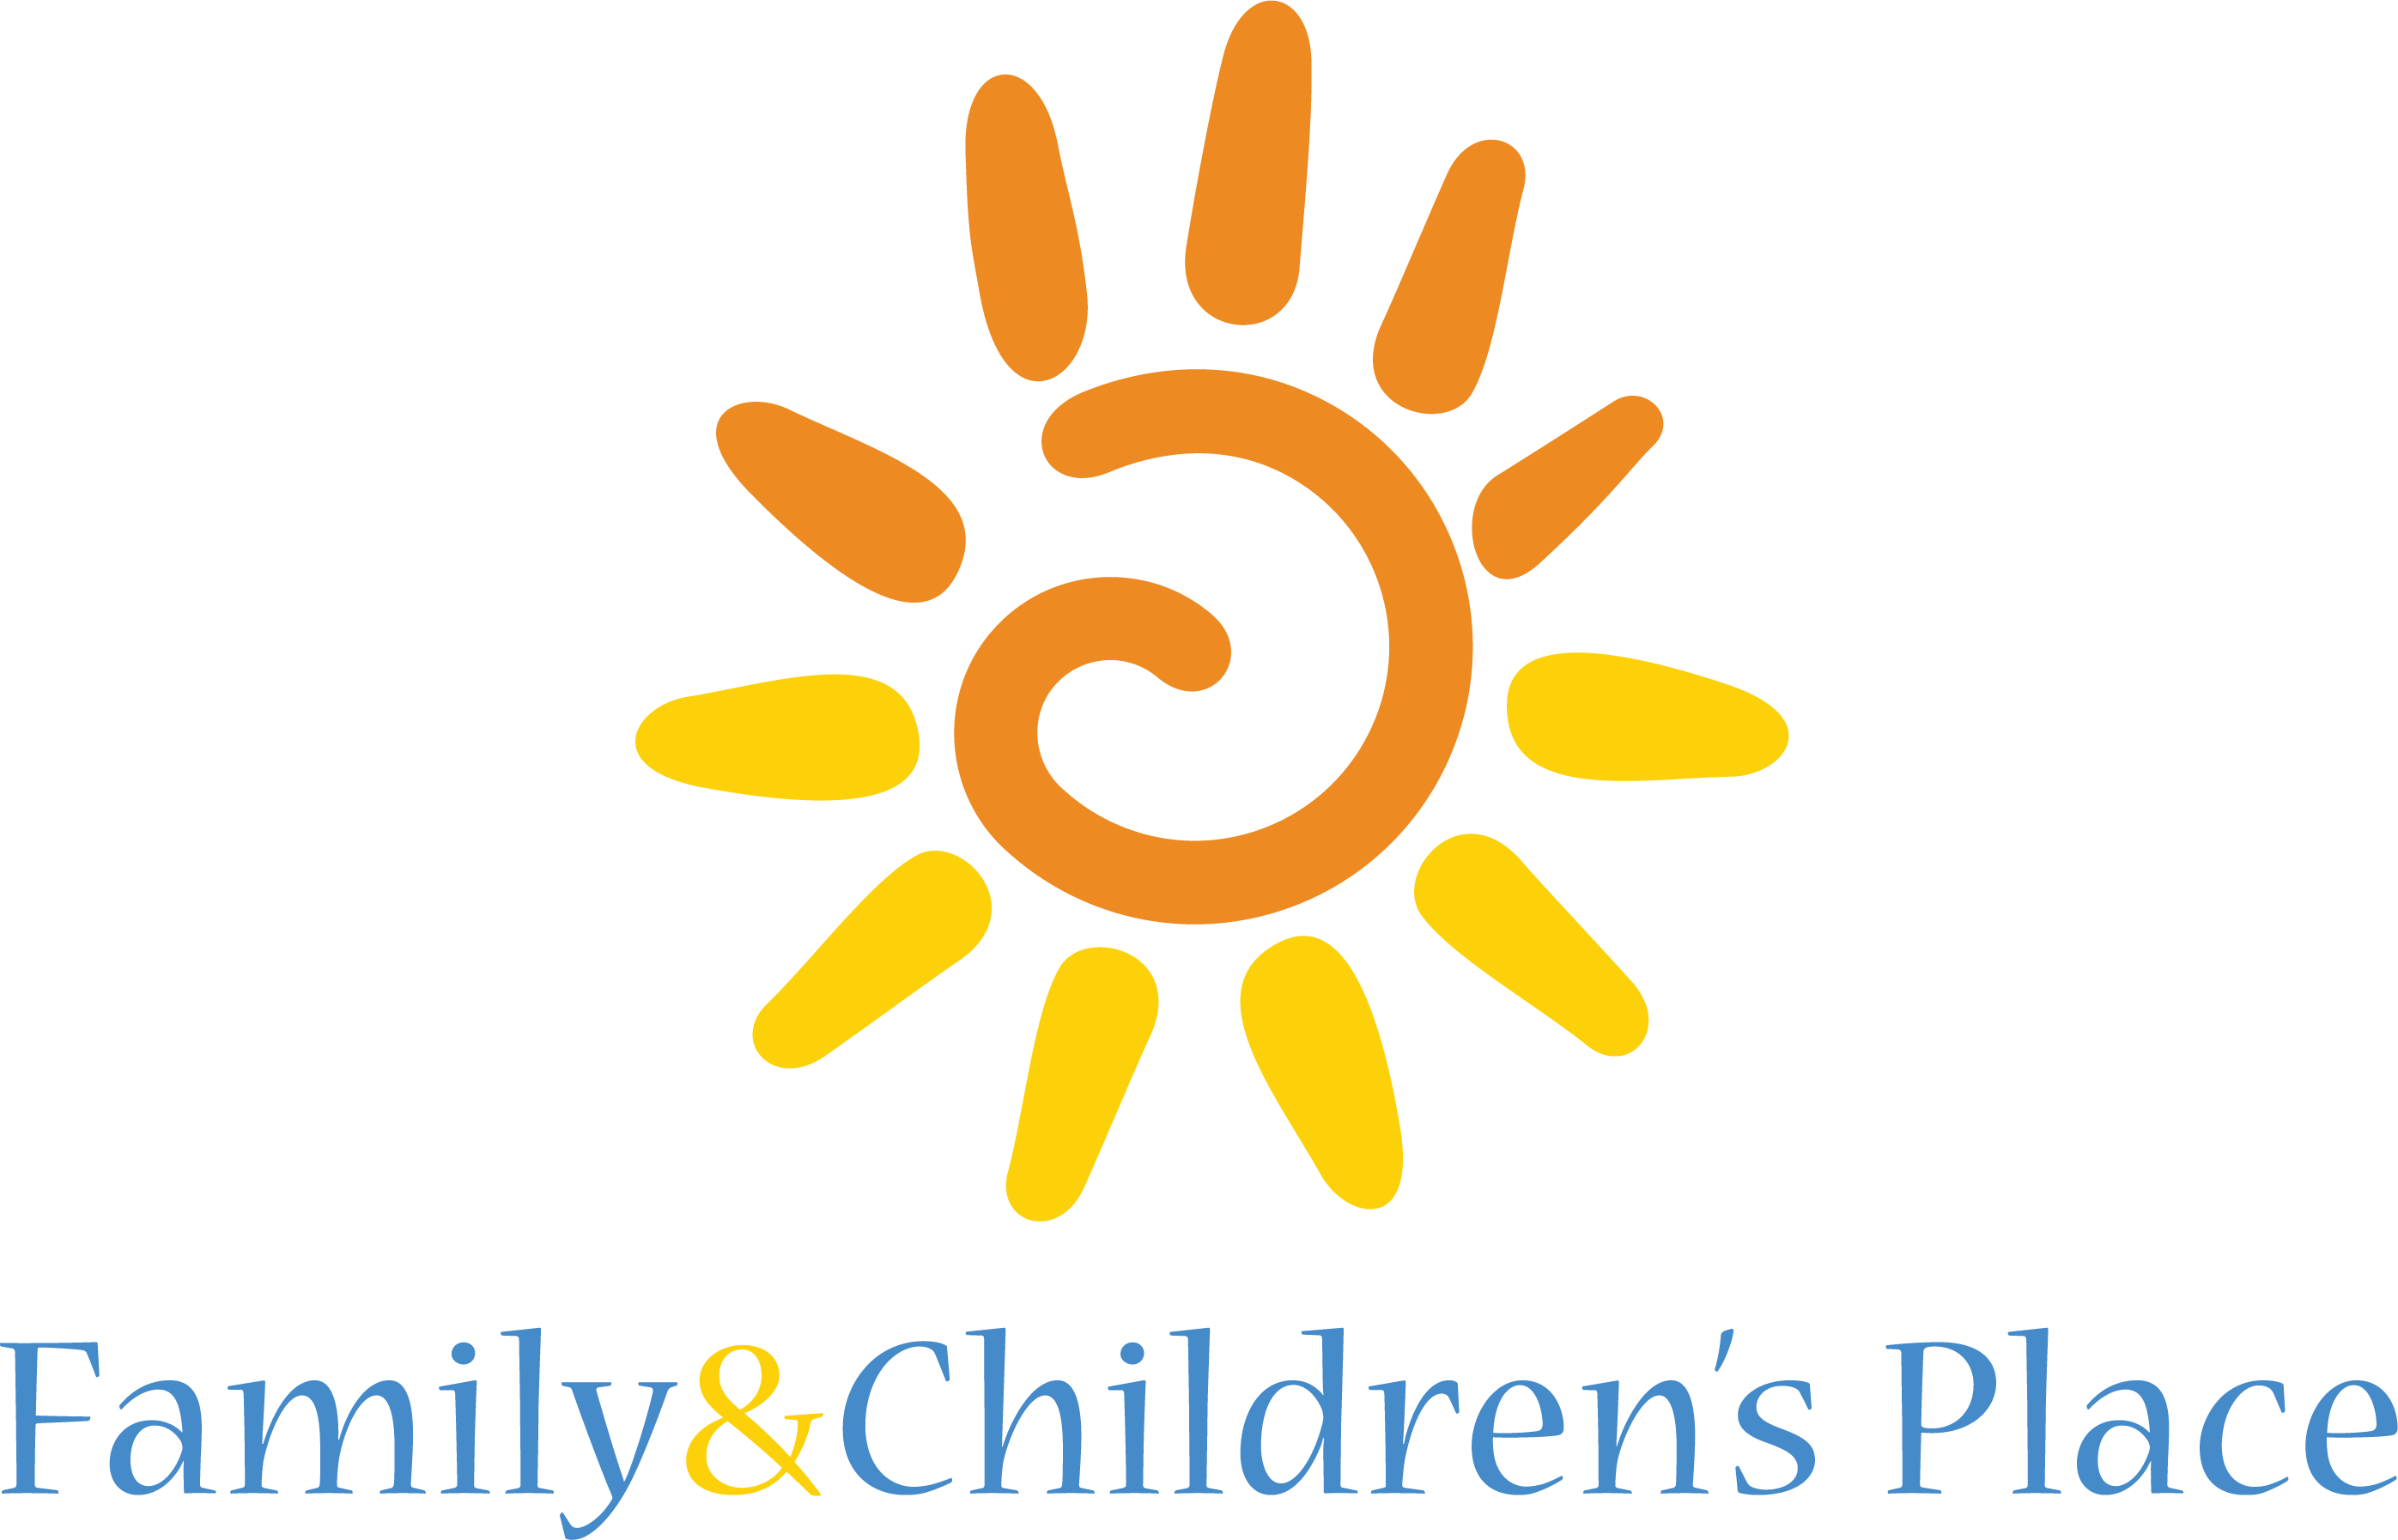 Family & Children's Place